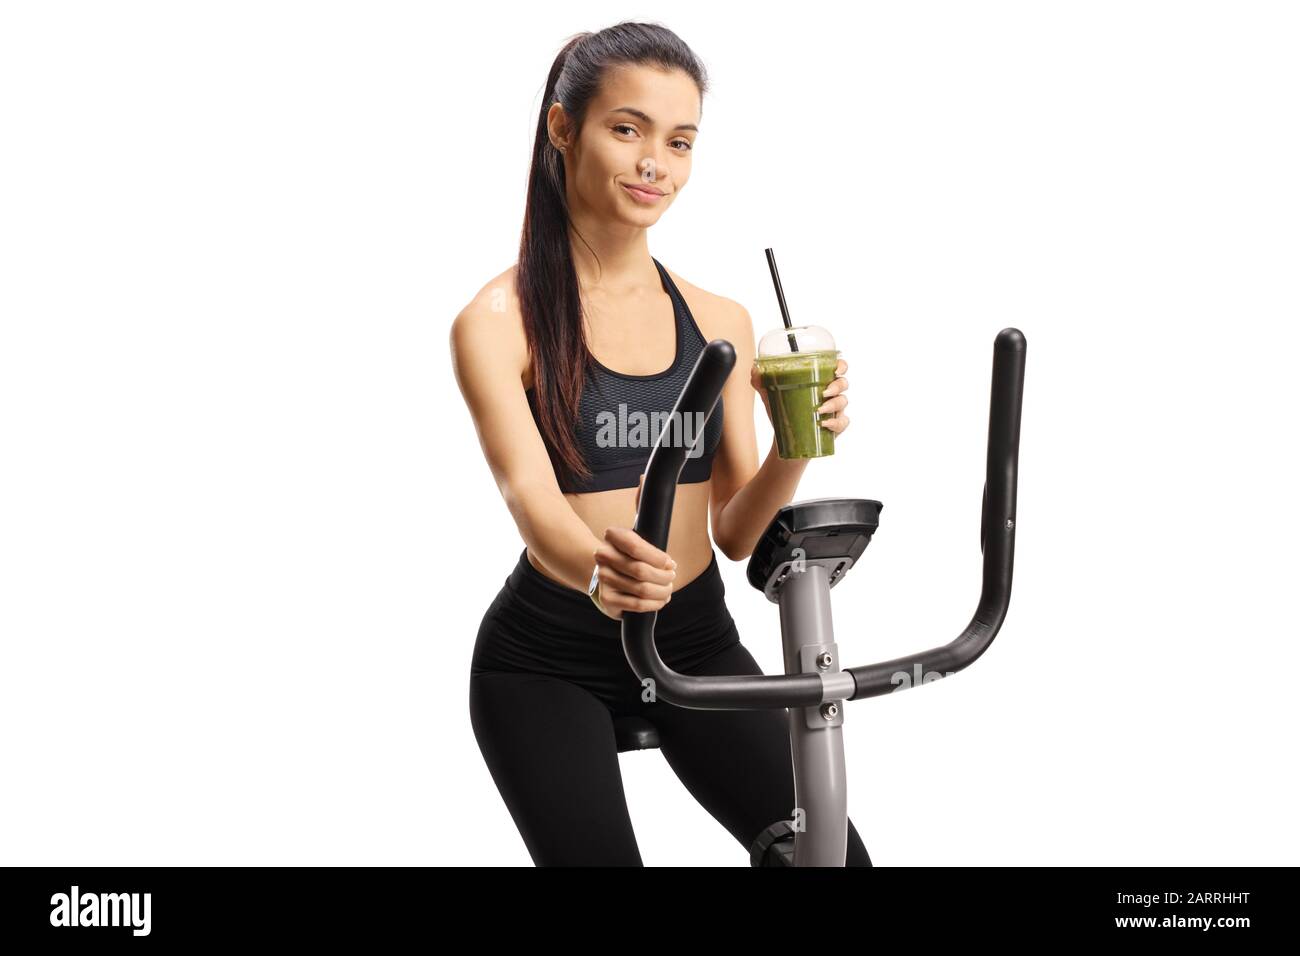 Young woman riding a stationary bike and holding a green healthy smoothie isolated on white background Stock Photo